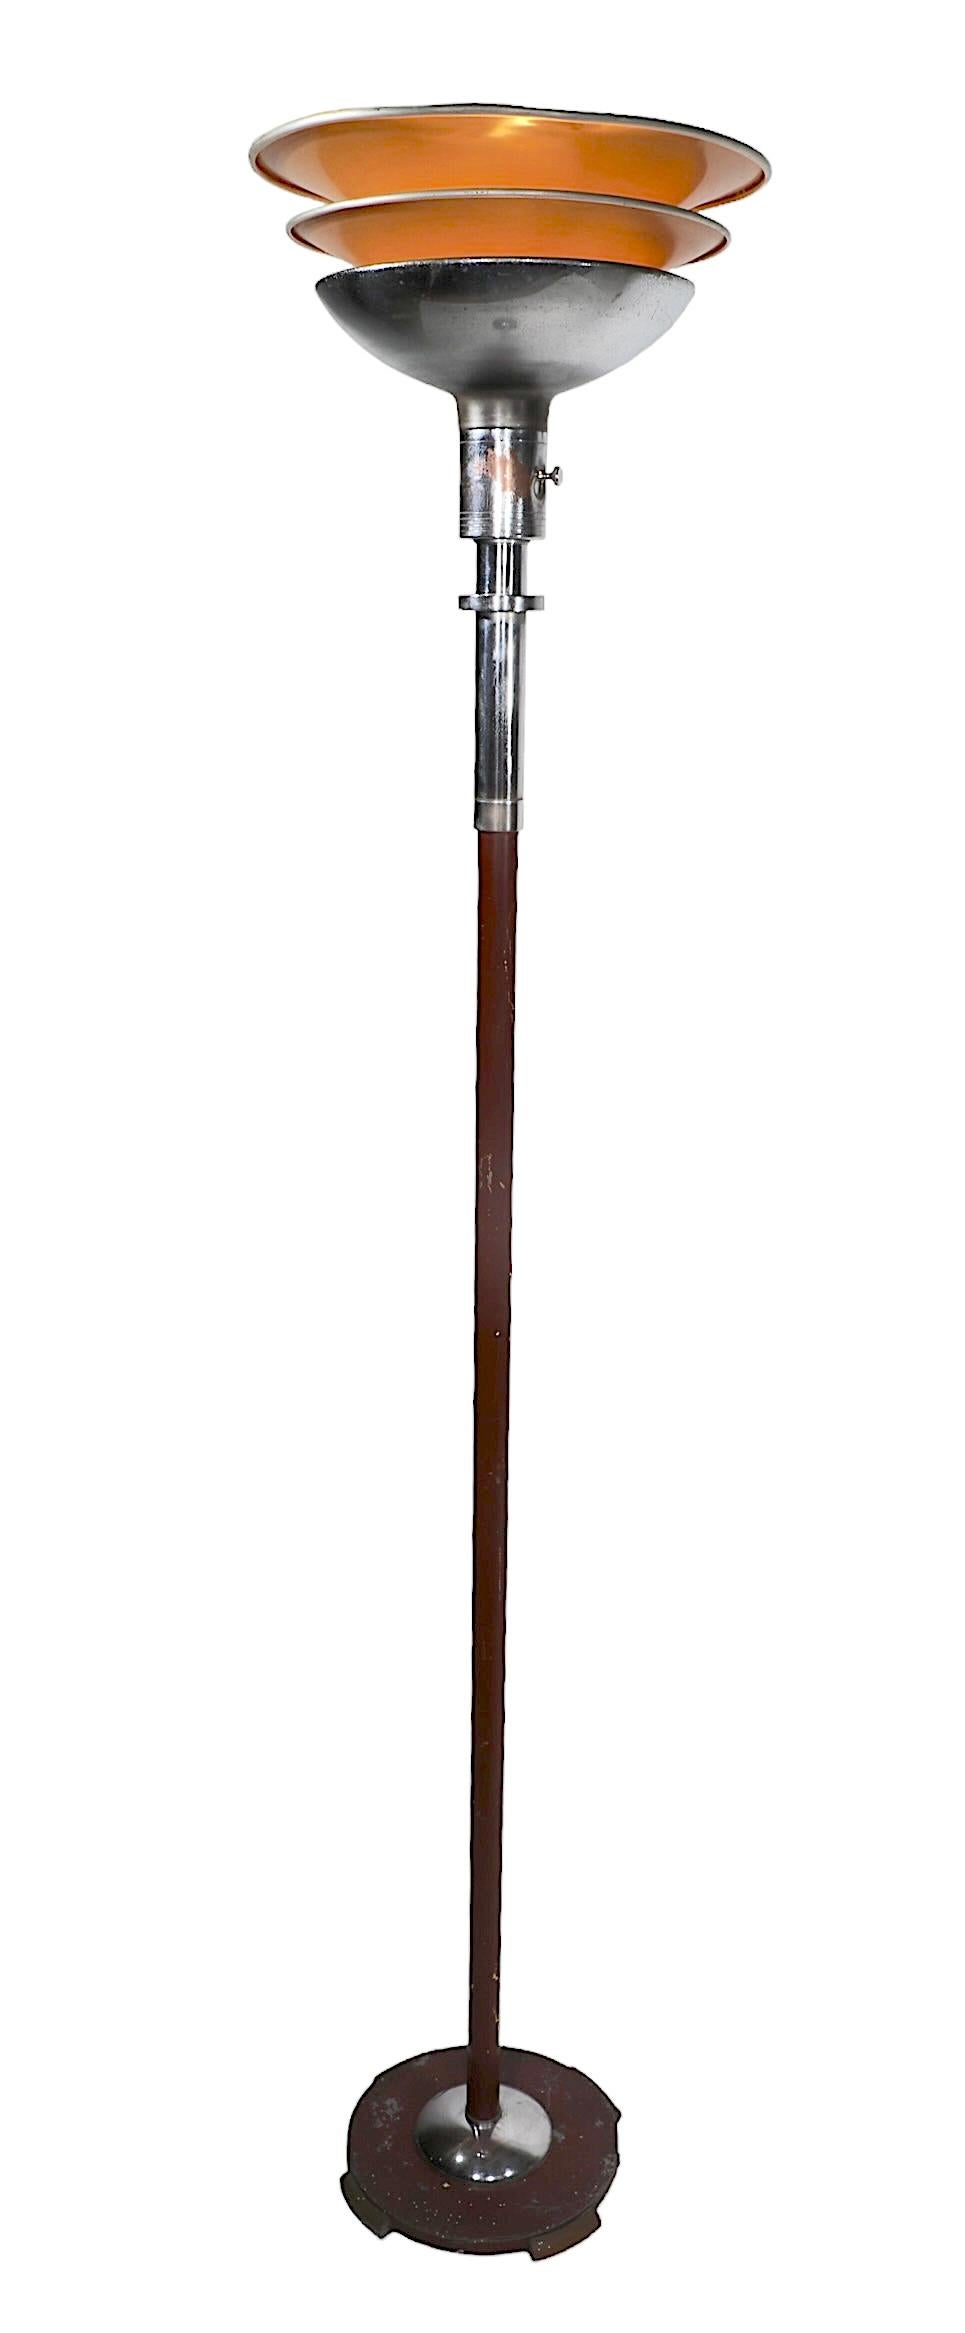 Art Deco Machine Age Torchiere  Floor Lamp by Rohde for Mutual Sunset Lamp Co.  For Sale 5